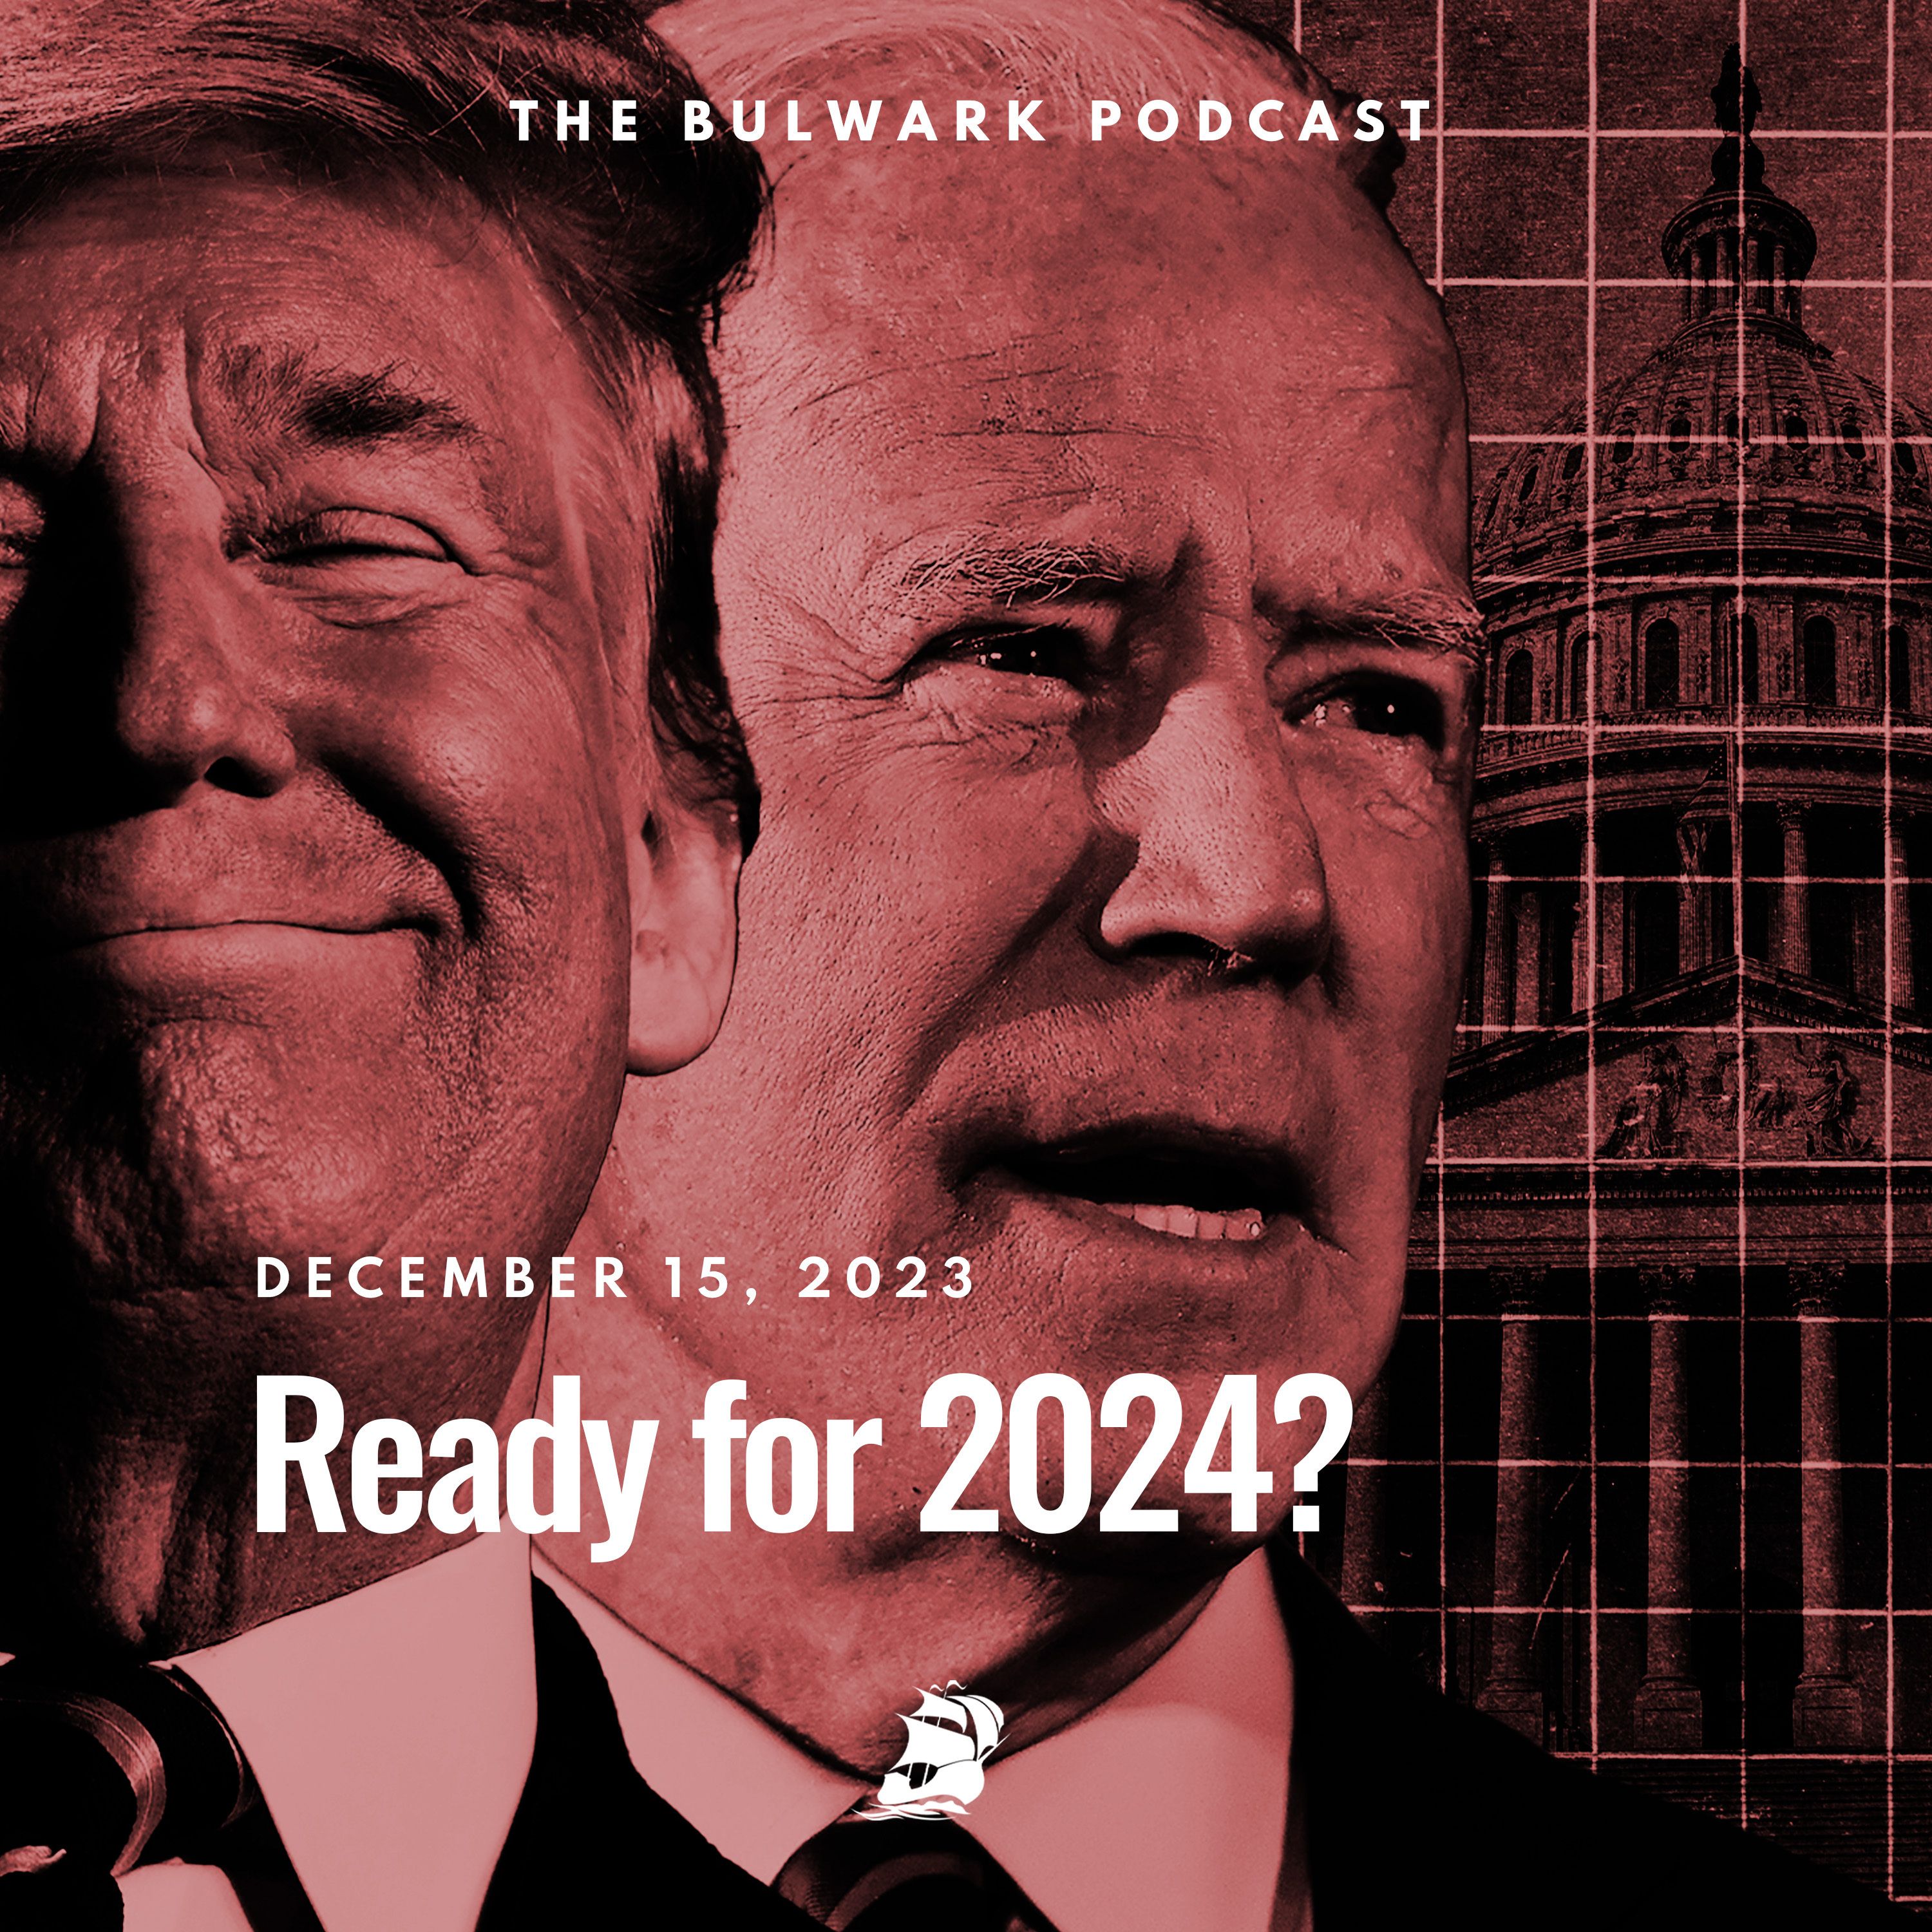 Ready for 2024?